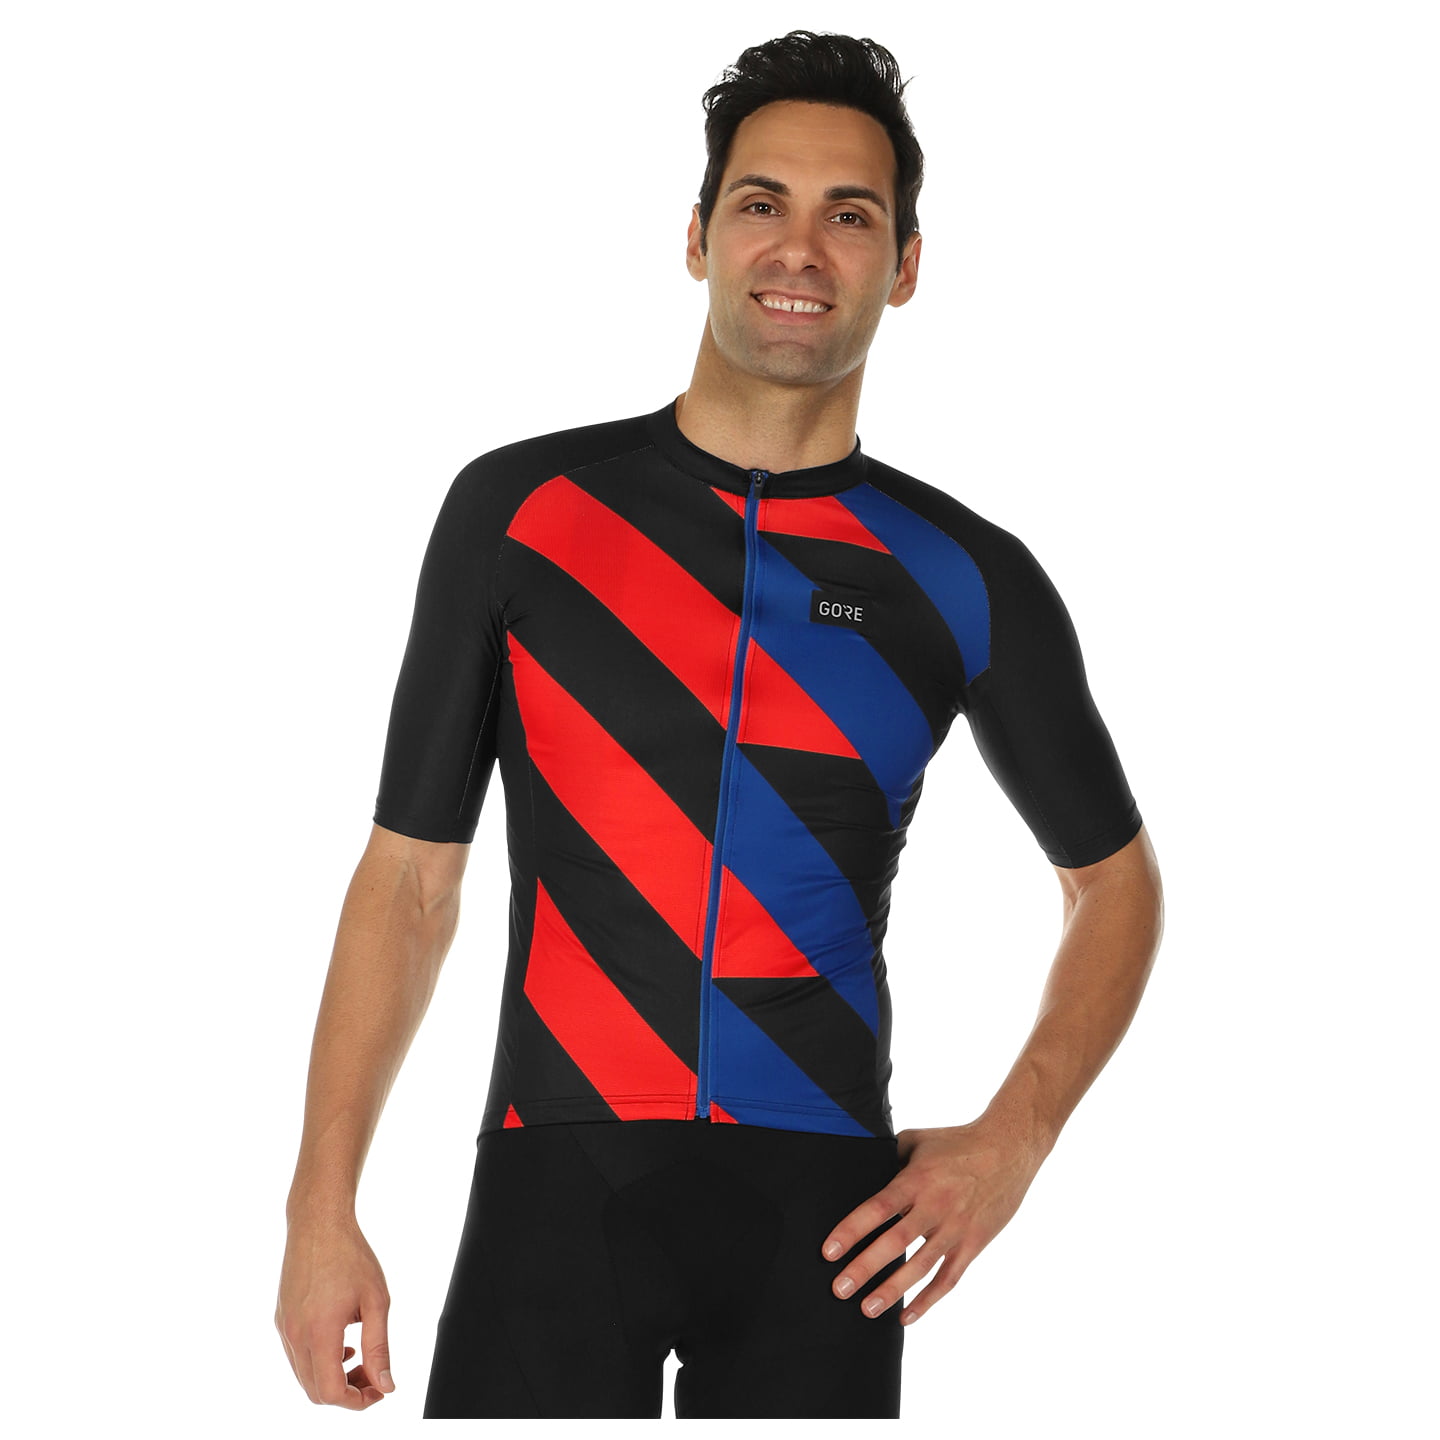 GORE WEAR Signal Short Sleeve Jersey Short Sleeve Jersey, for men, size 2XL, Cycling jersey, Cycle clothing